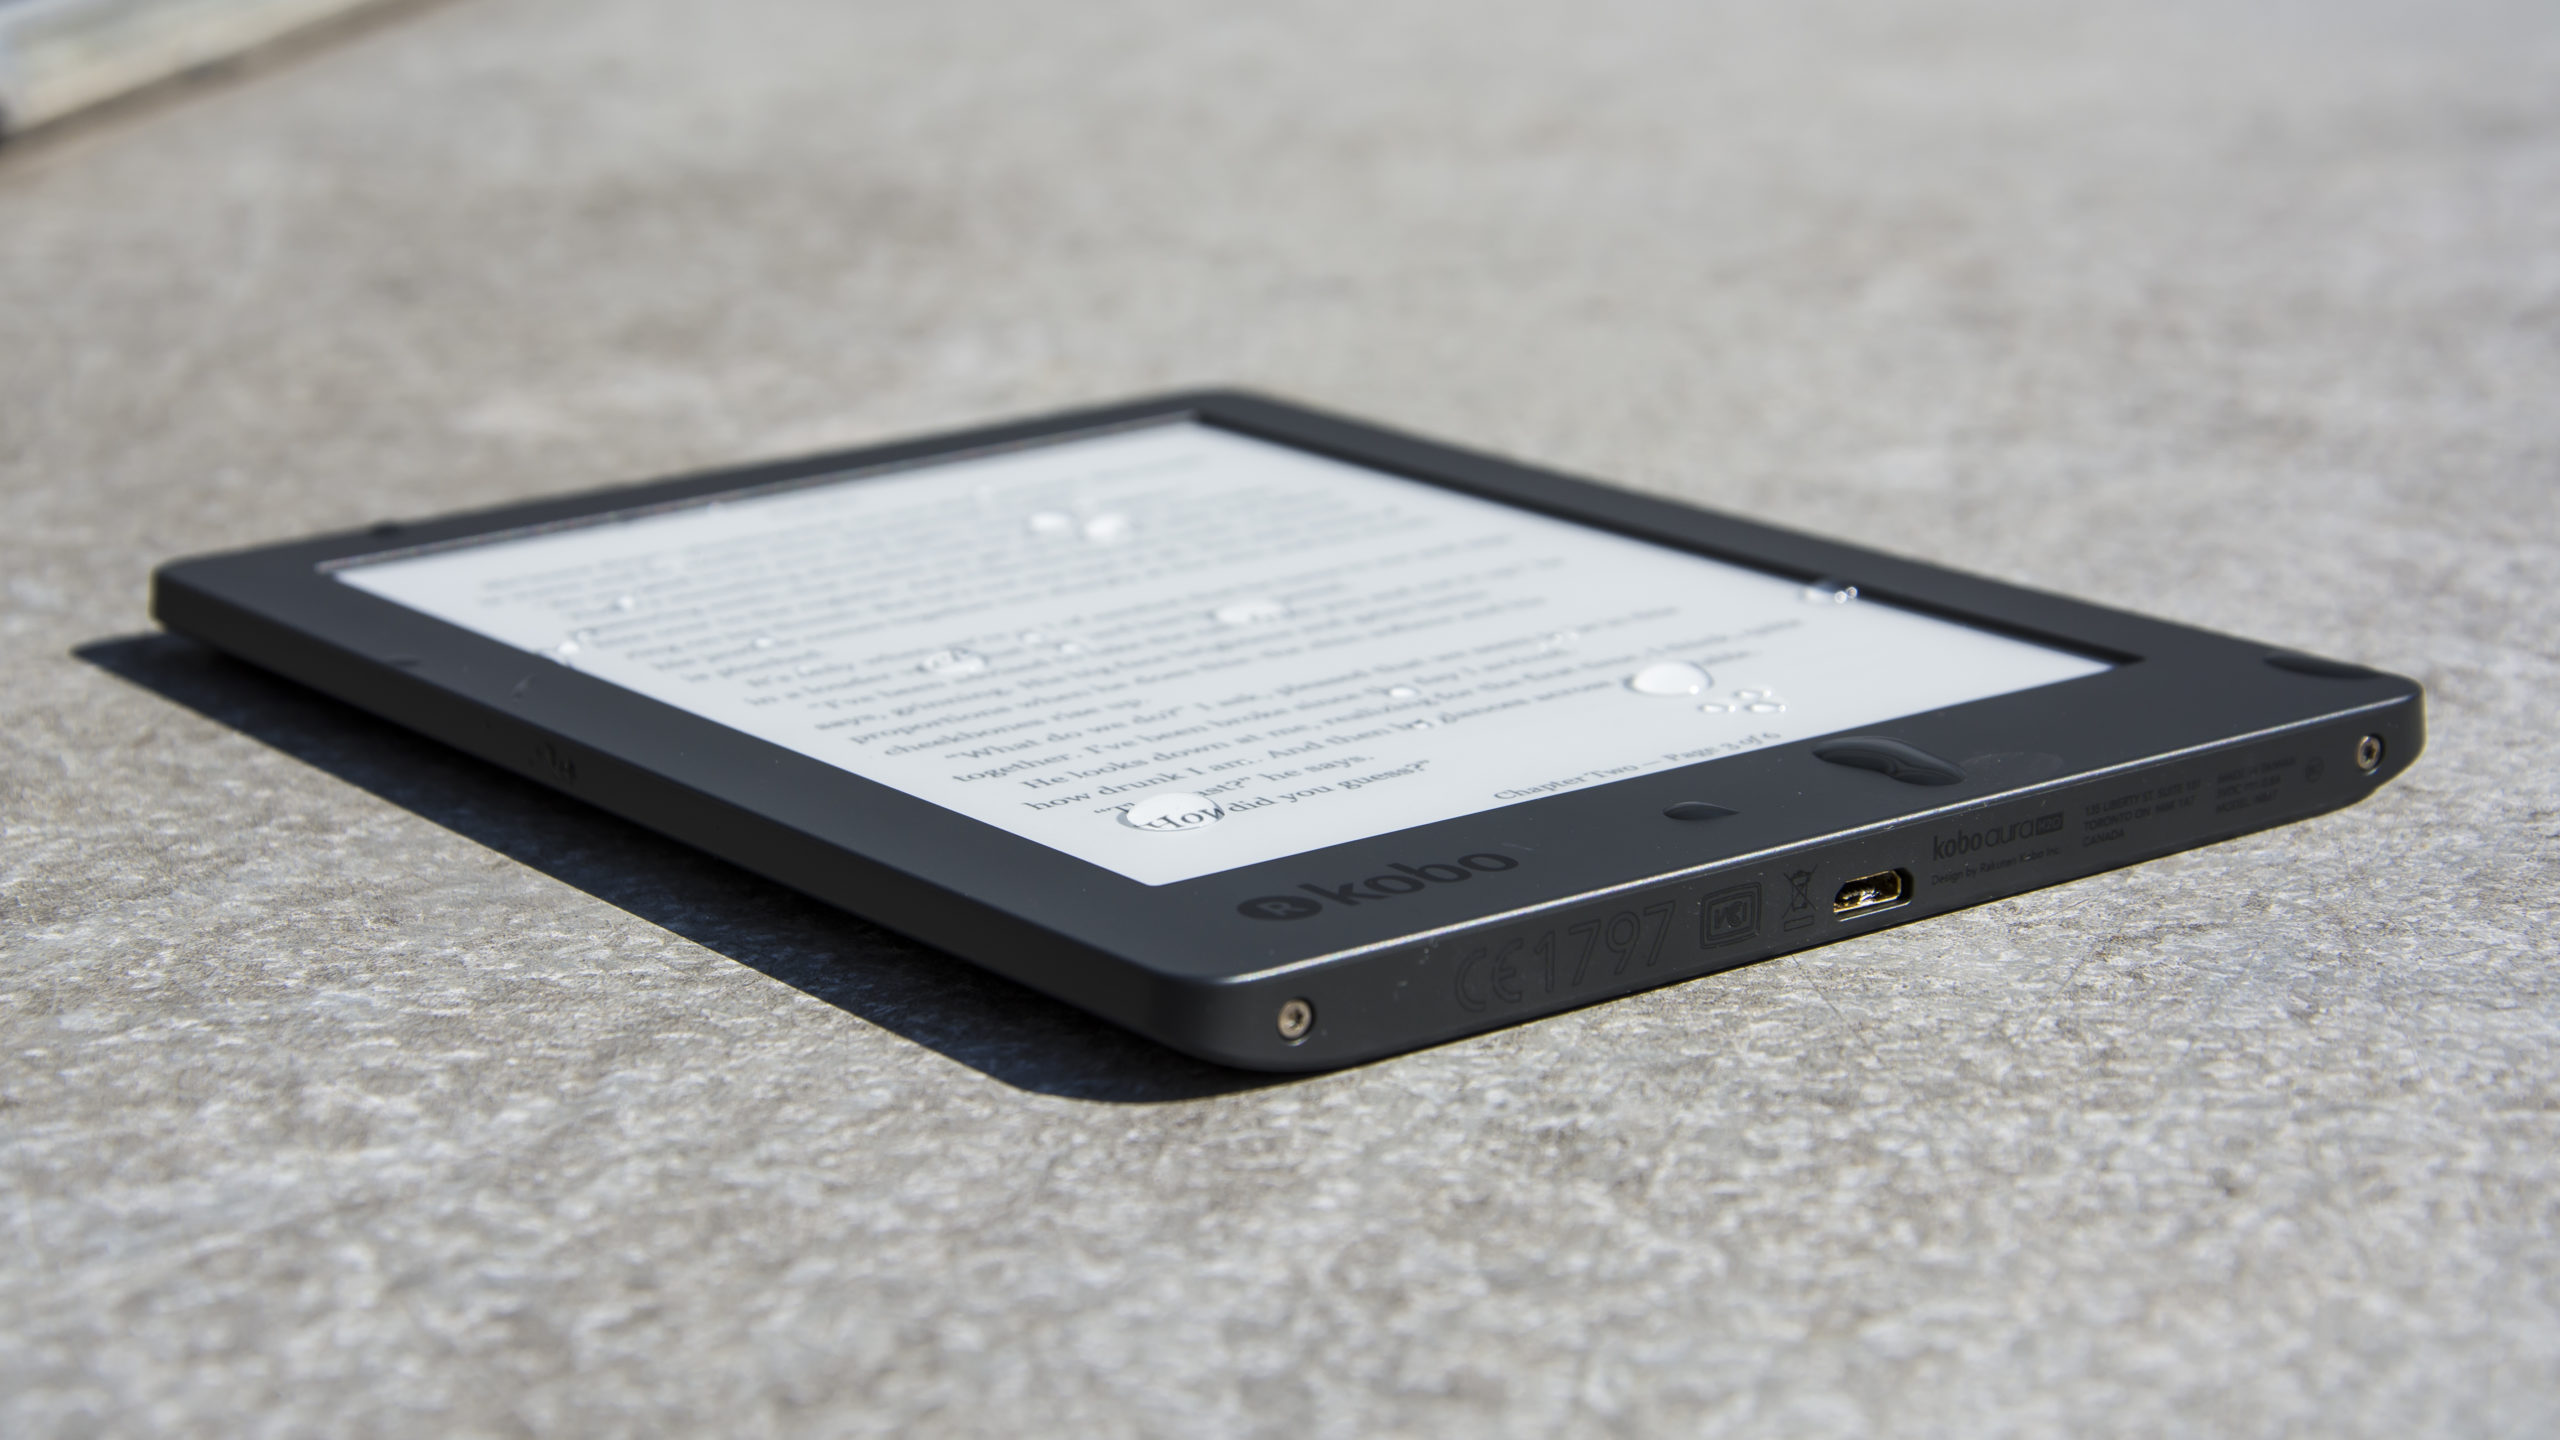 Riskeren Brochure Treinstation Kobo Aura H20 2017 review – Kindle's distant rival provides a great read